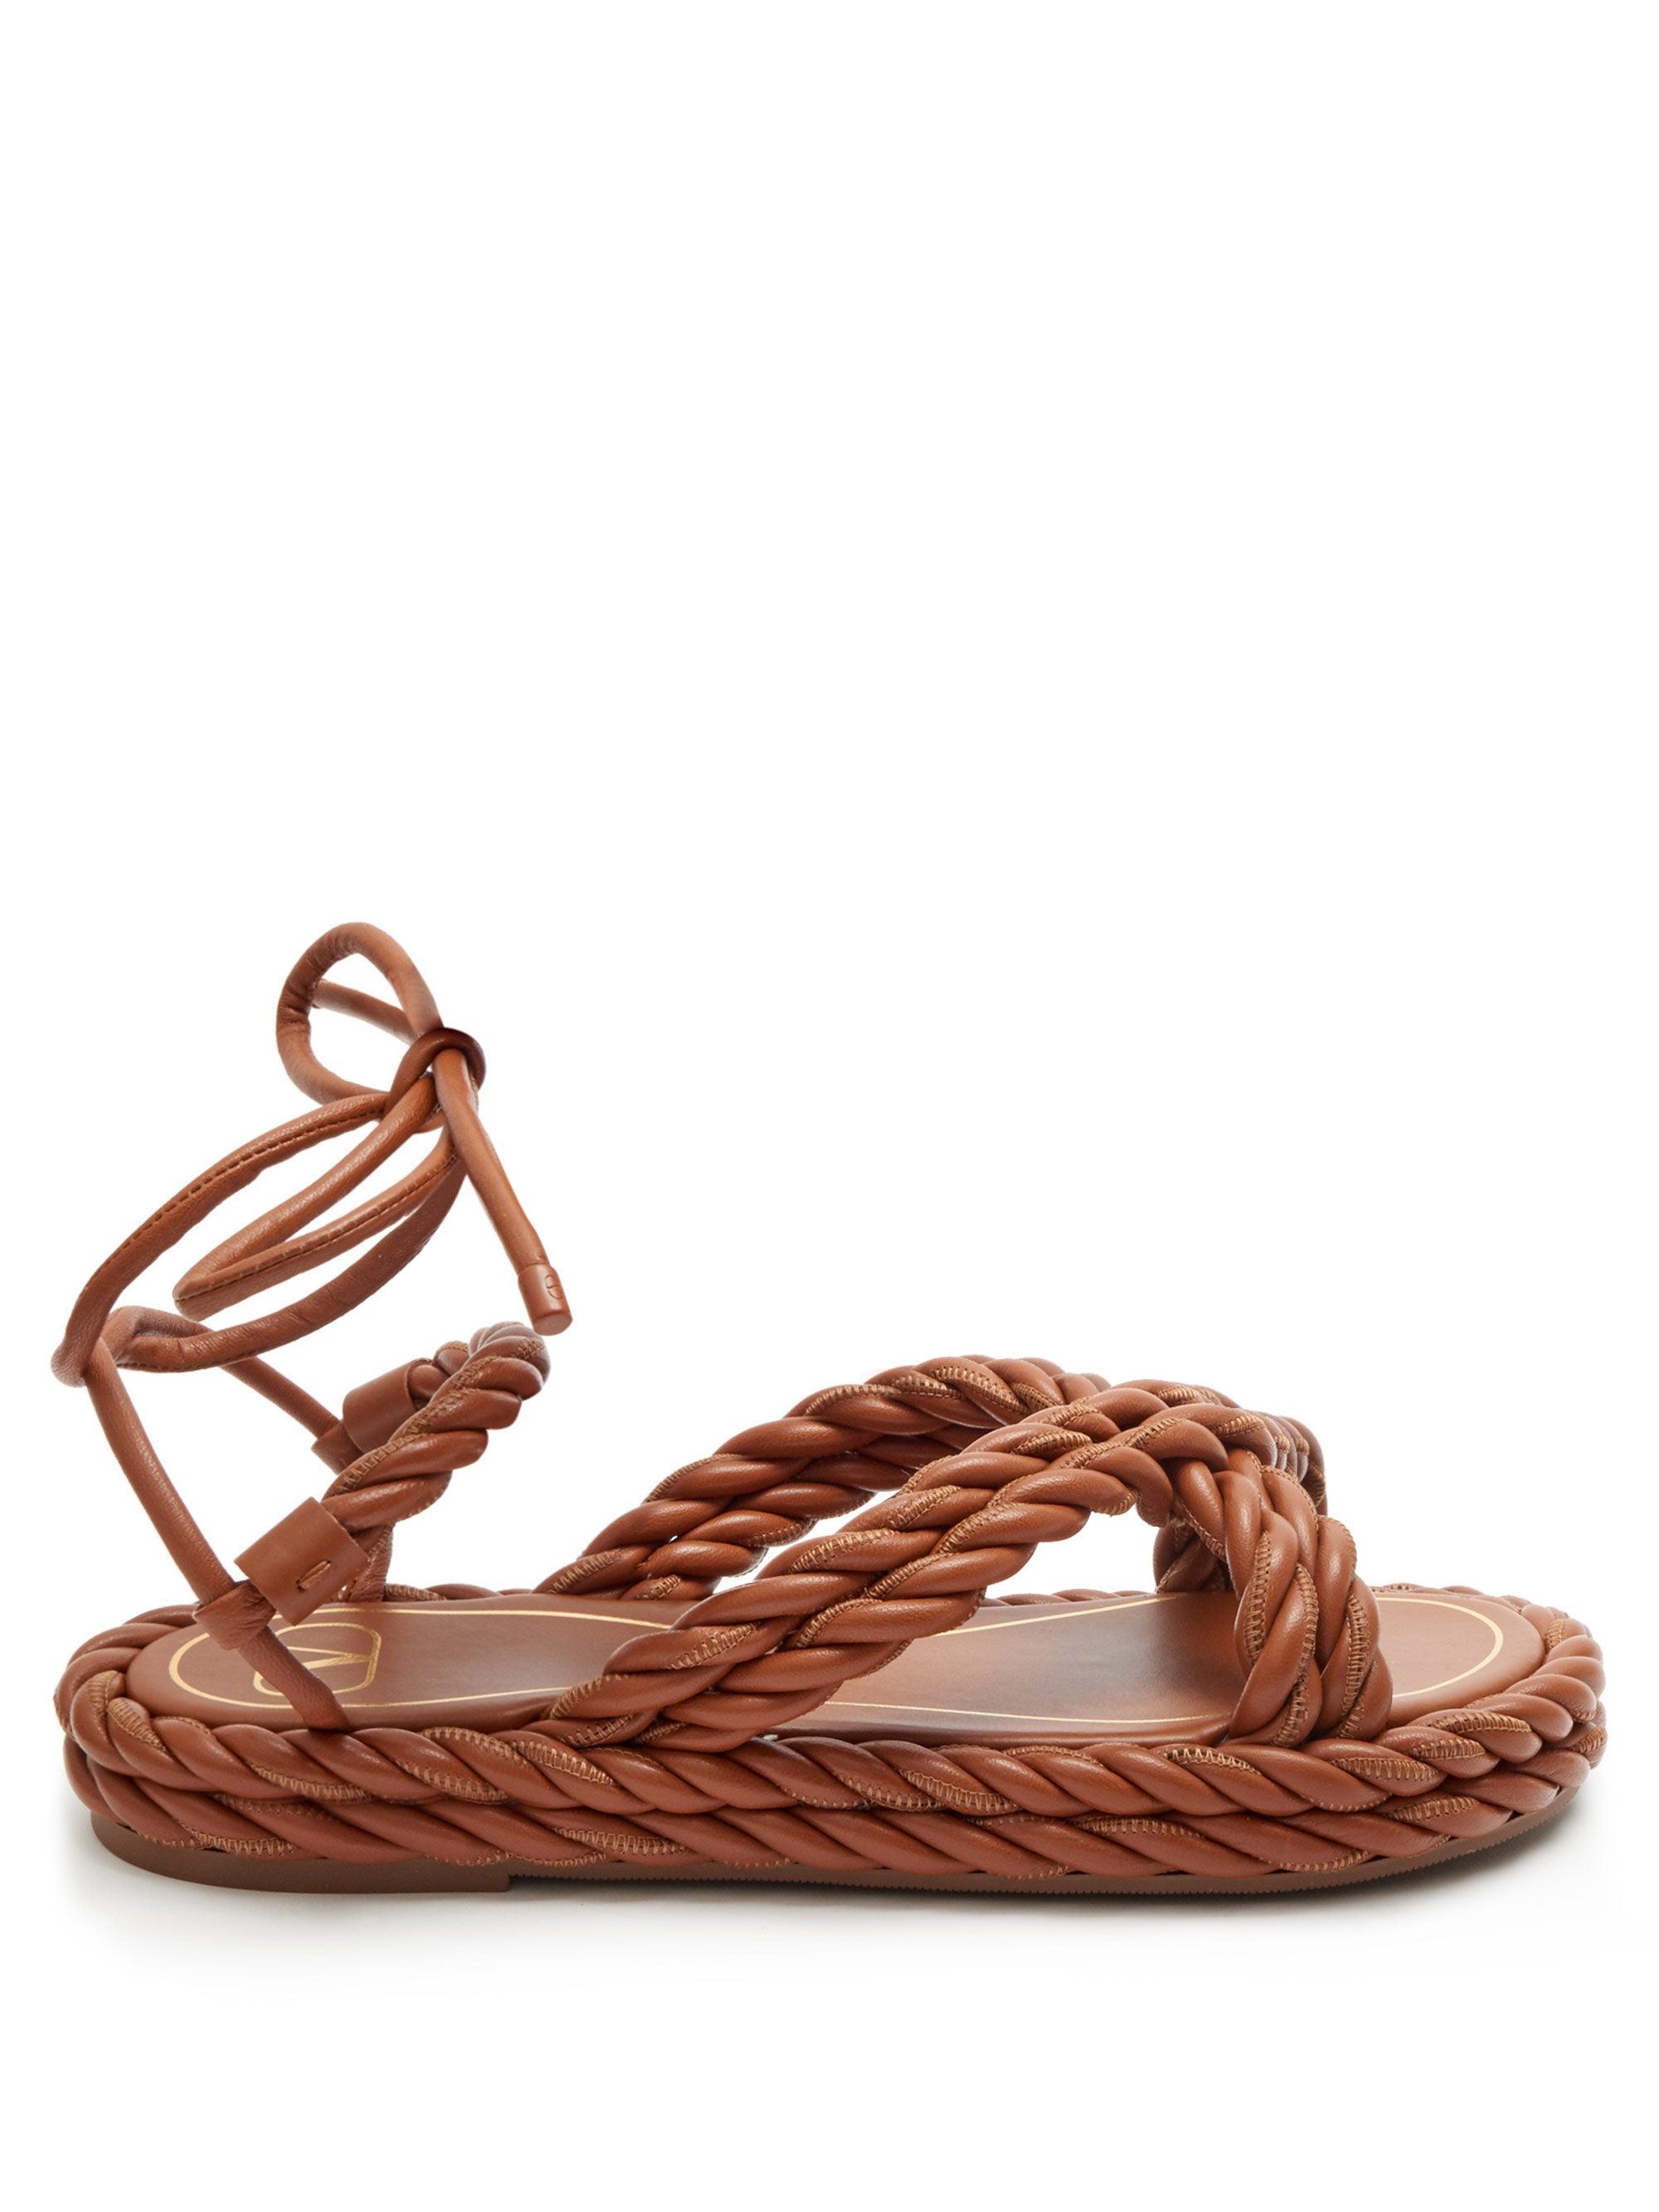 Valentino The Rope Ankle-tie Leather Sandals in Tan (Brown) - Lyst